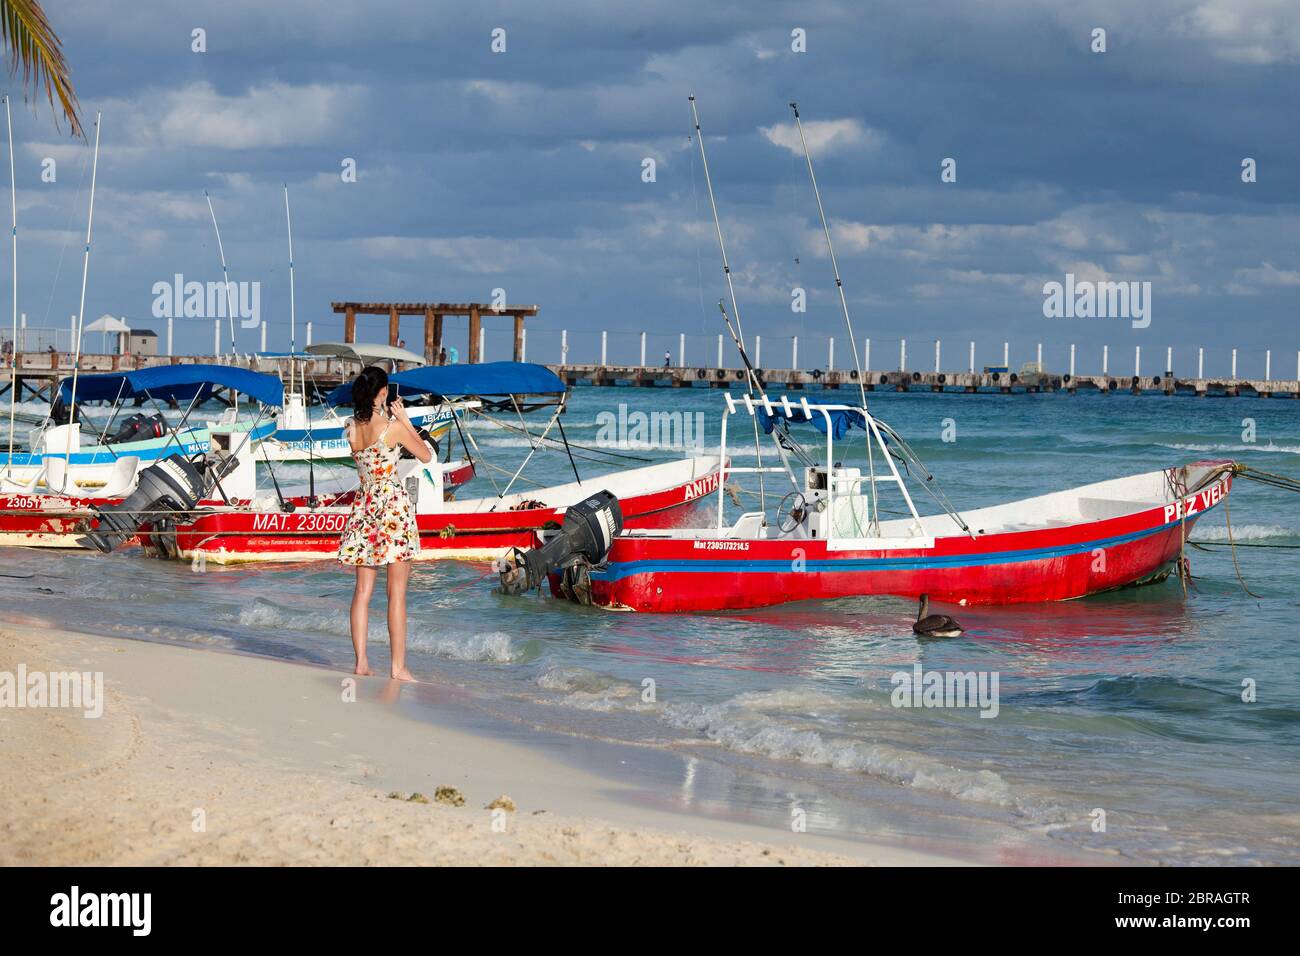 A young woman takes a photo of colorful boats near the docks of Playa del Carmen, Quintana Roo, Mexico. Stock Photo